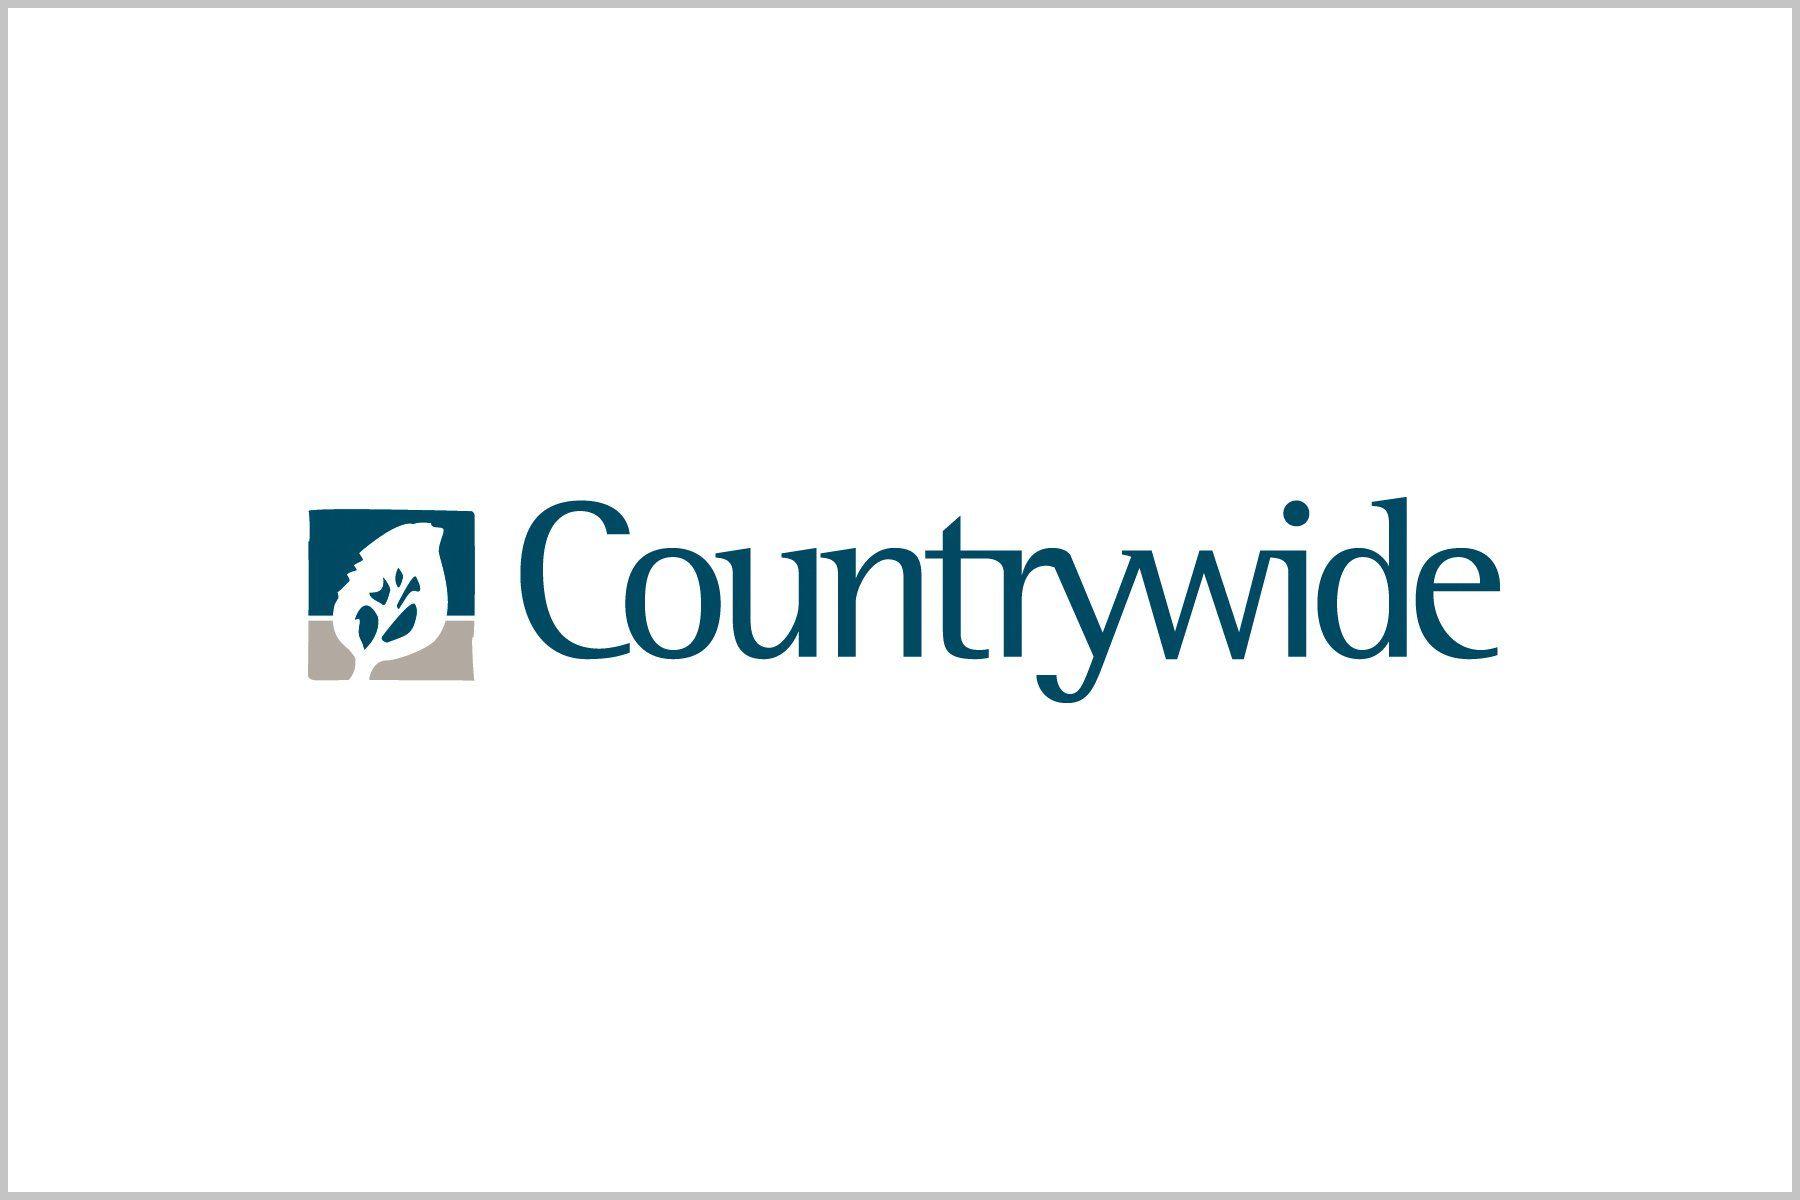 Countrywide Logo - Our brands | Countrywide Plc